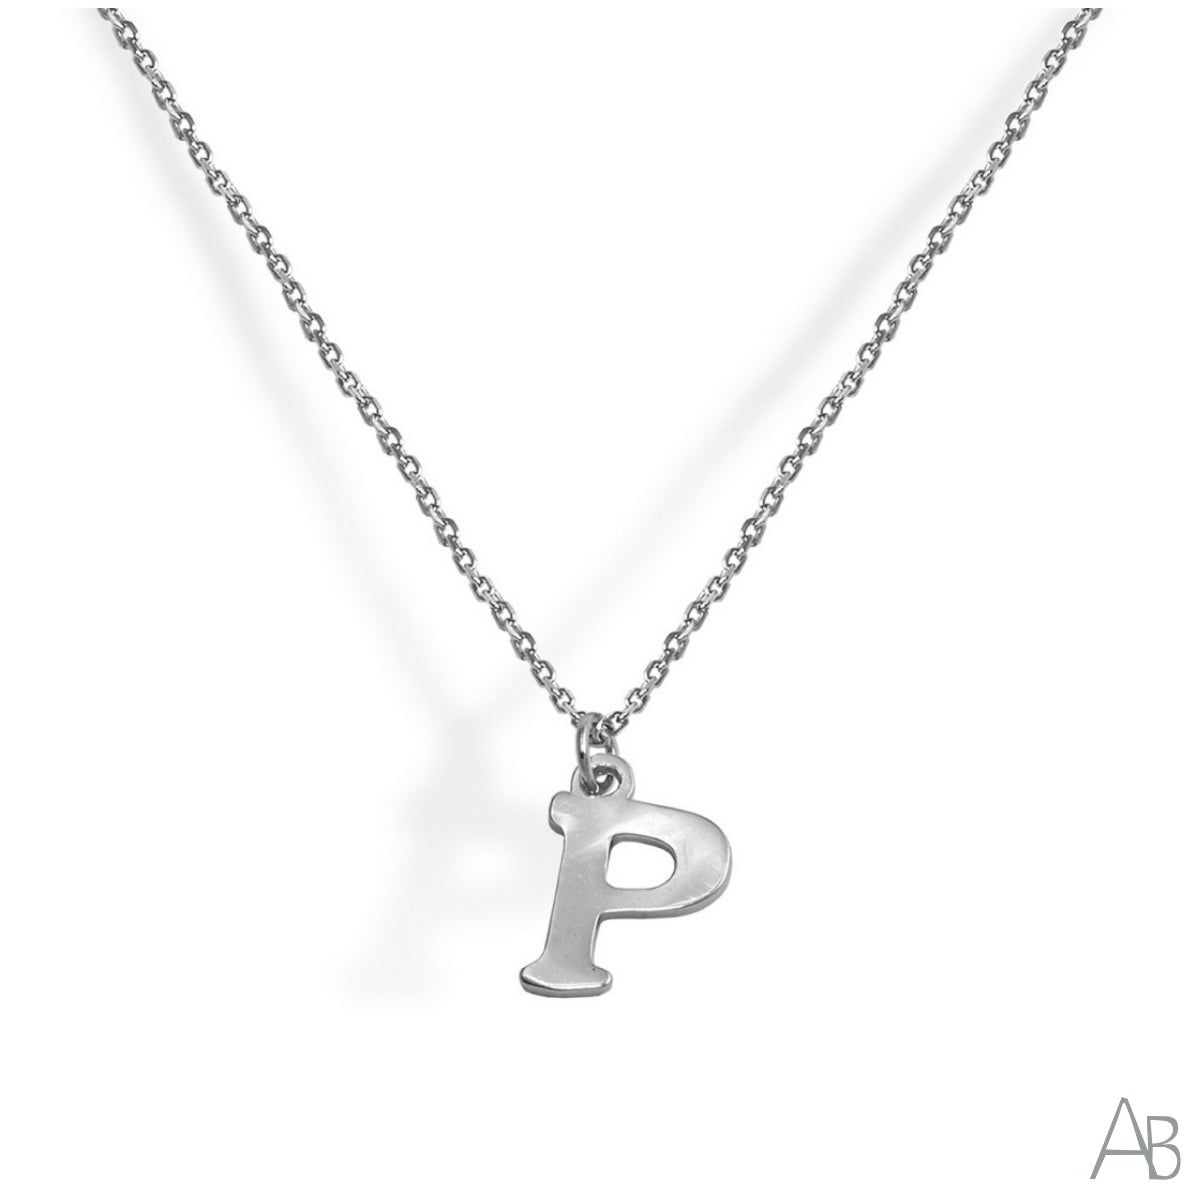 SILVER NECKLACE LETTER P